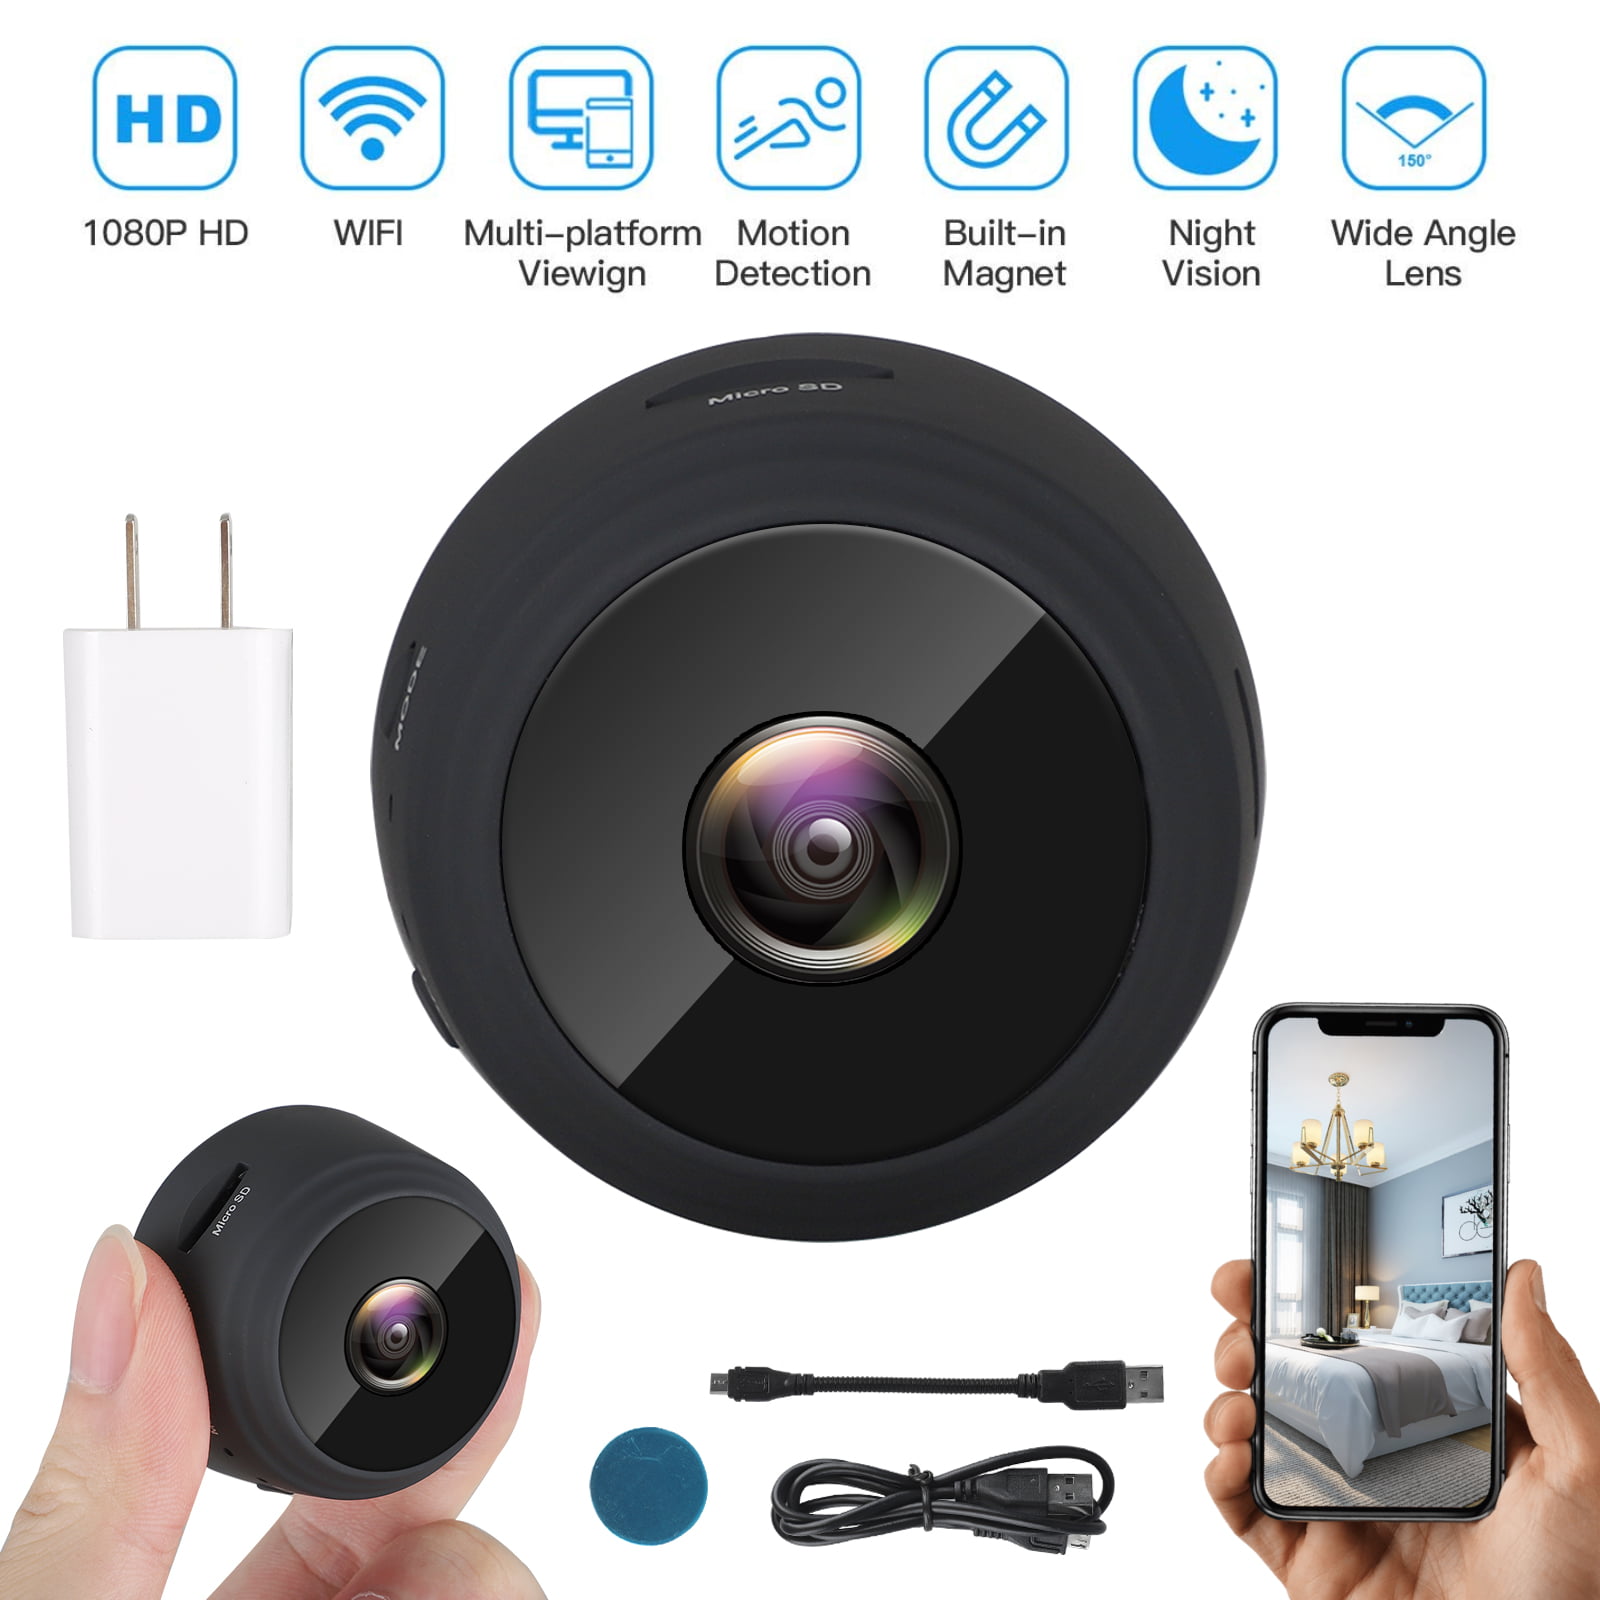 Tsv Mini Wifi Home Security Camera 1080 720p Hd Smart Indoor Nanny Cam With Night Vision